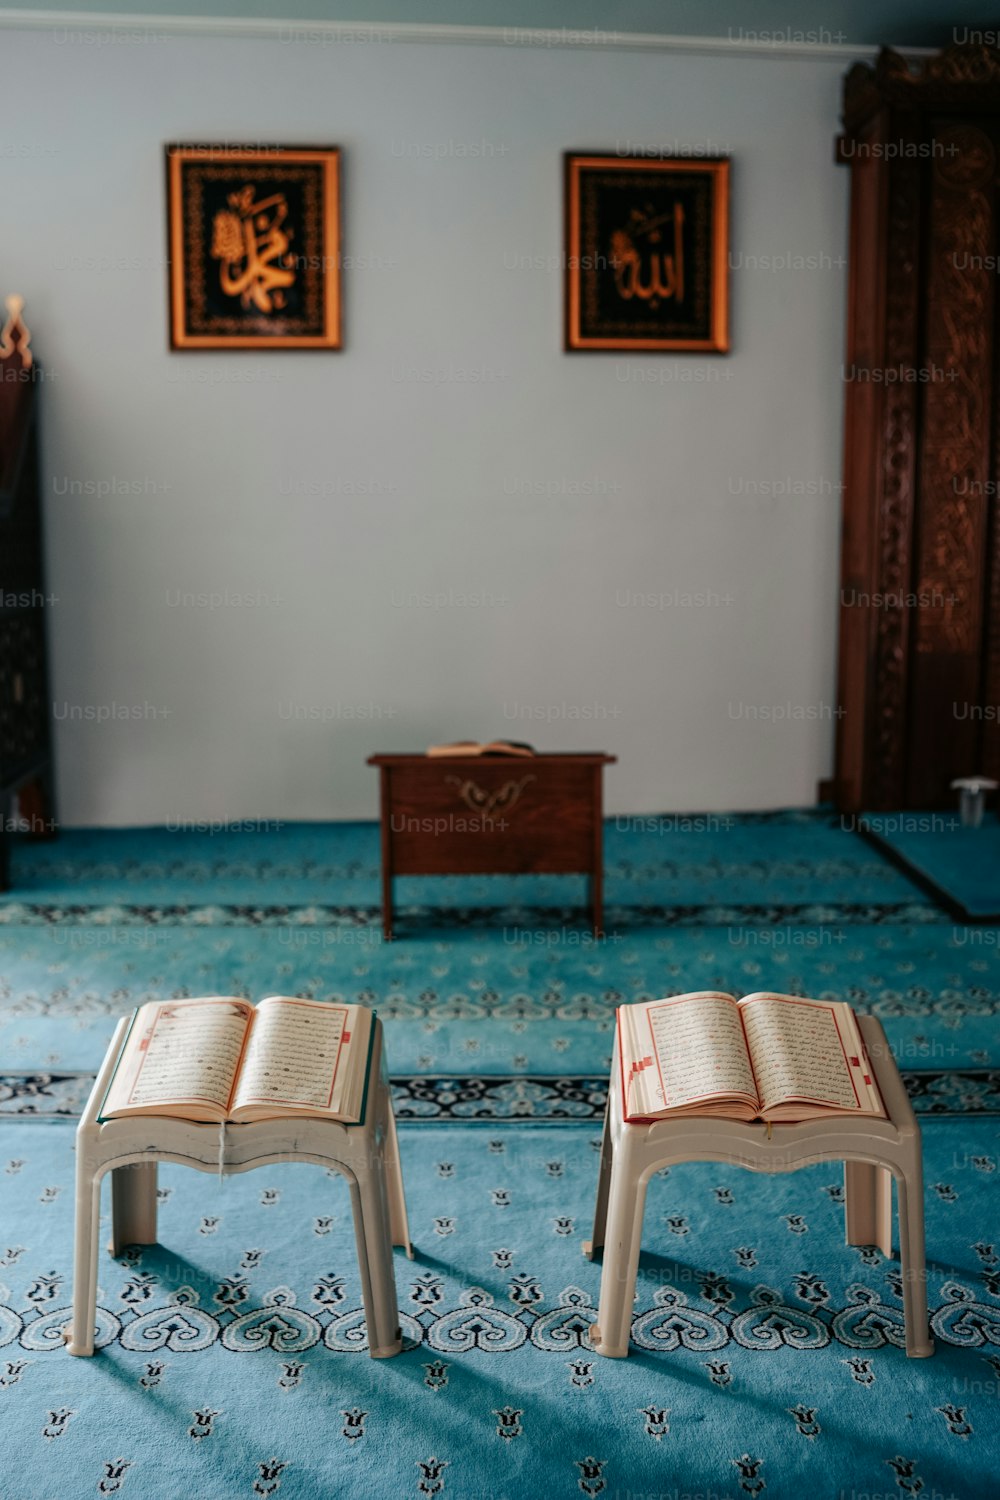 two miniature stools sitting on a rug in a room